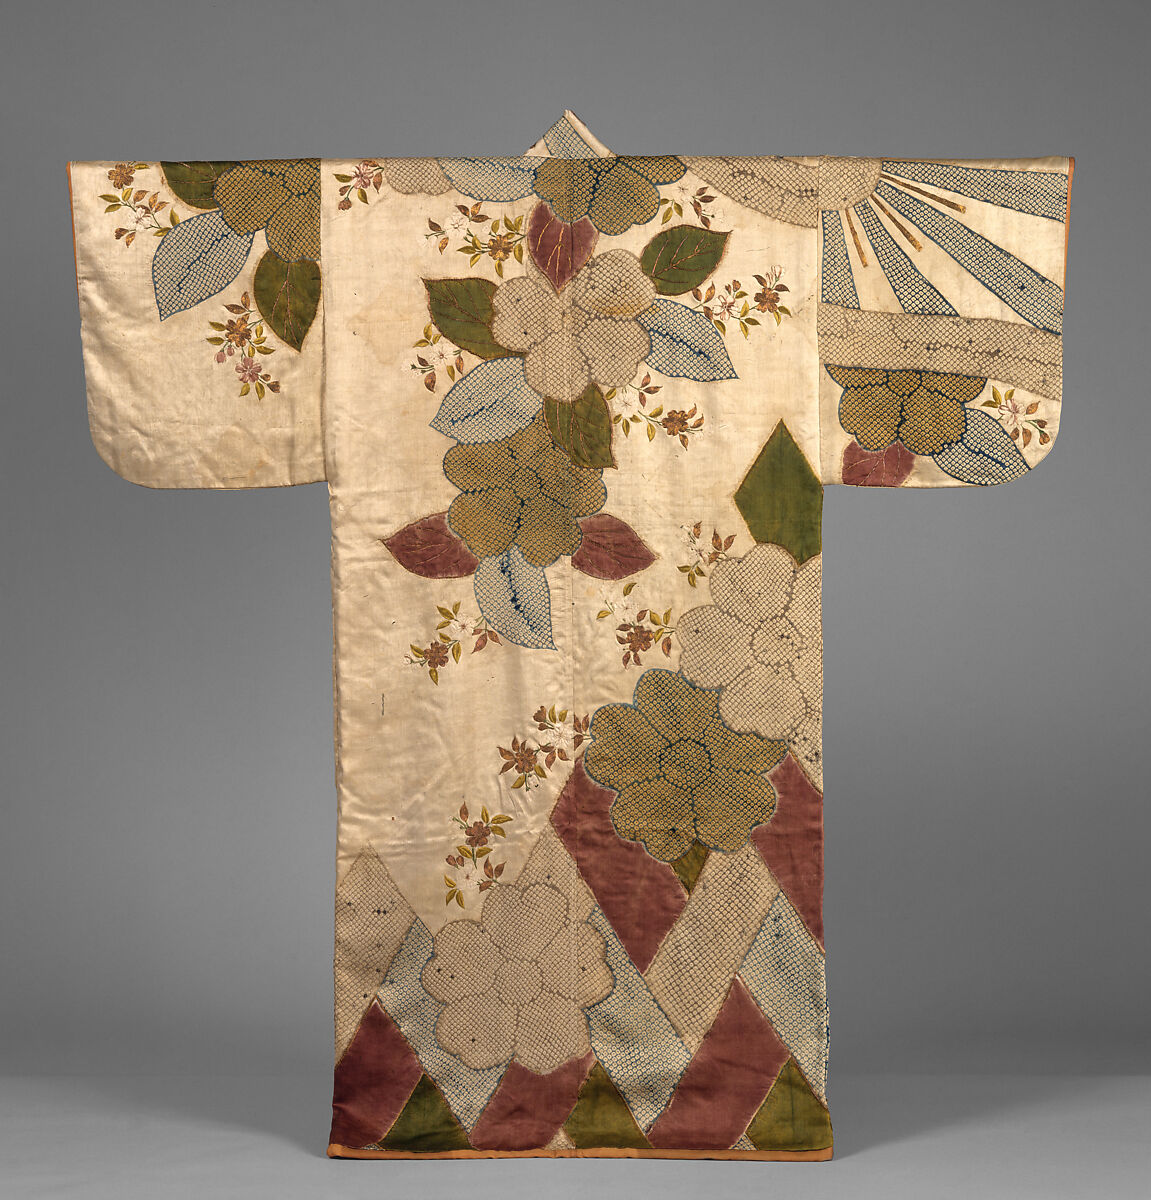 Robe (Kosode) with Cherry Blossoms and Cypress Fence, Silk and metallic thread embroidery with resist dyeing on satin damask, Japan 